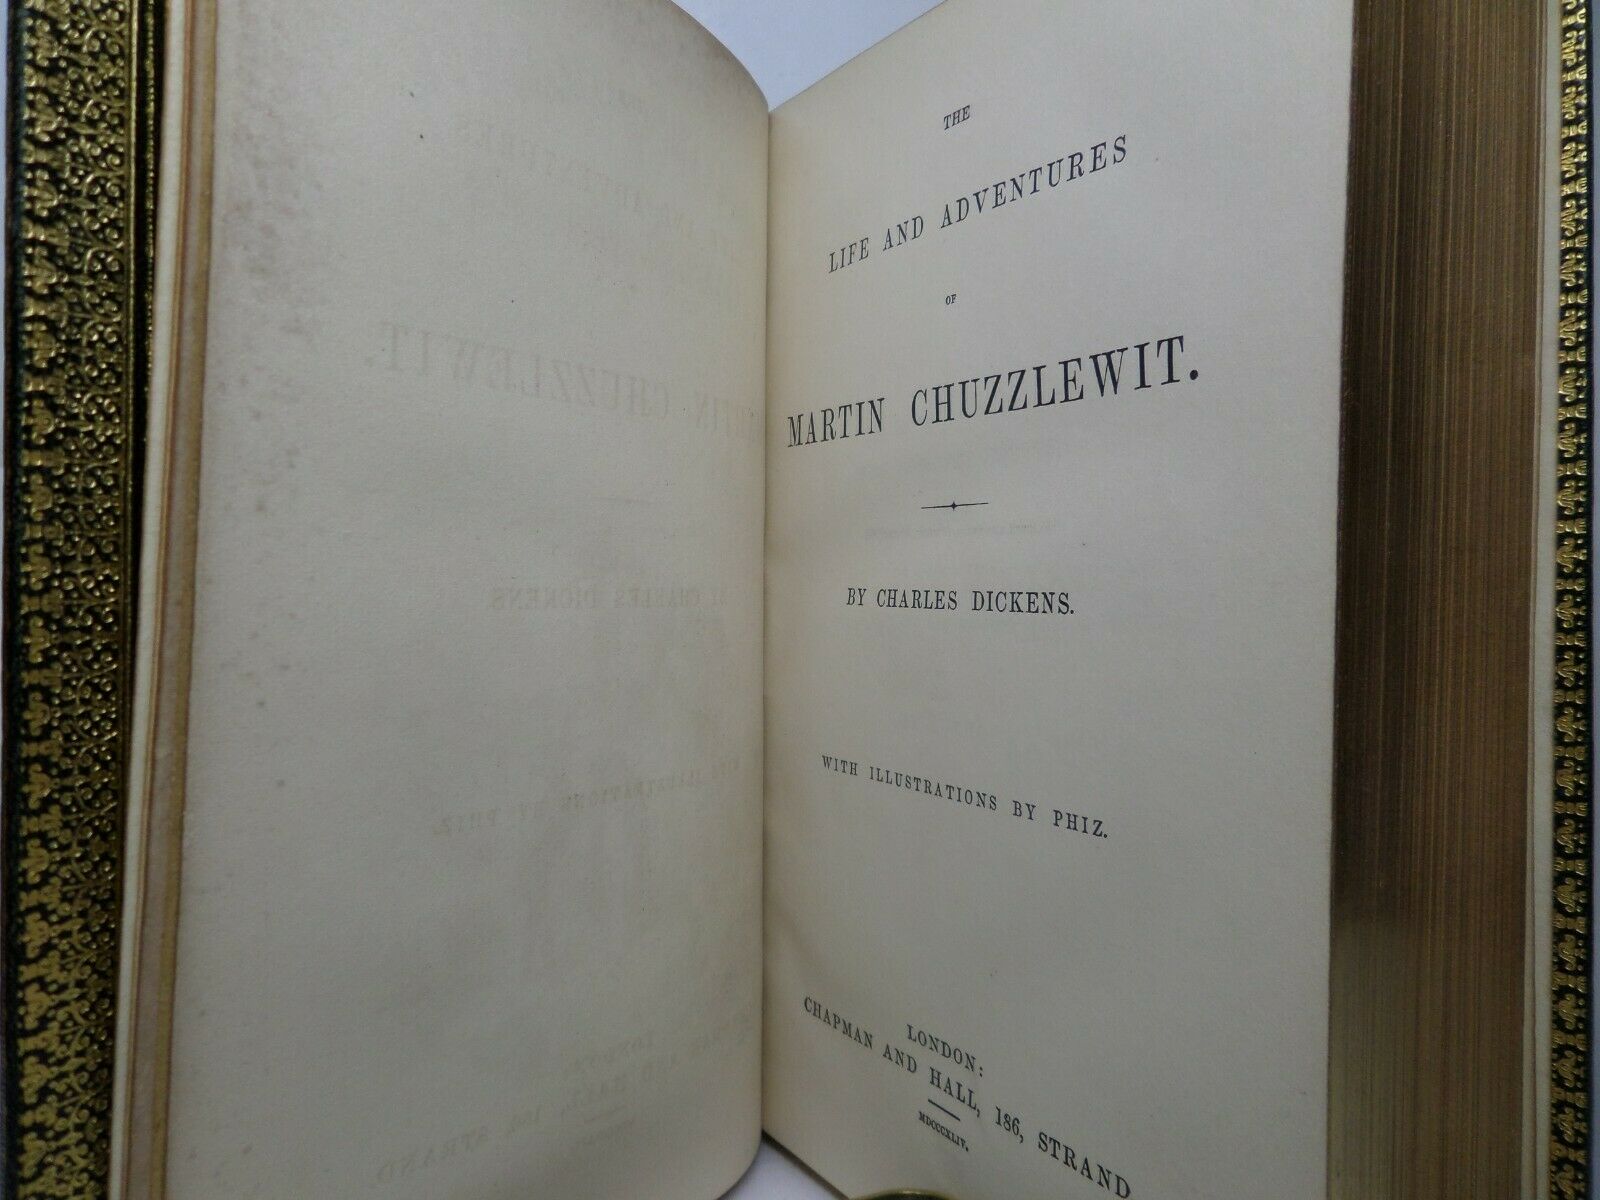 MARTIN CHUZZLEWIT BY CHARLES DICKENS 1844 FIRST EDITION, FINE BAYNTUN RIVIERE BINDING